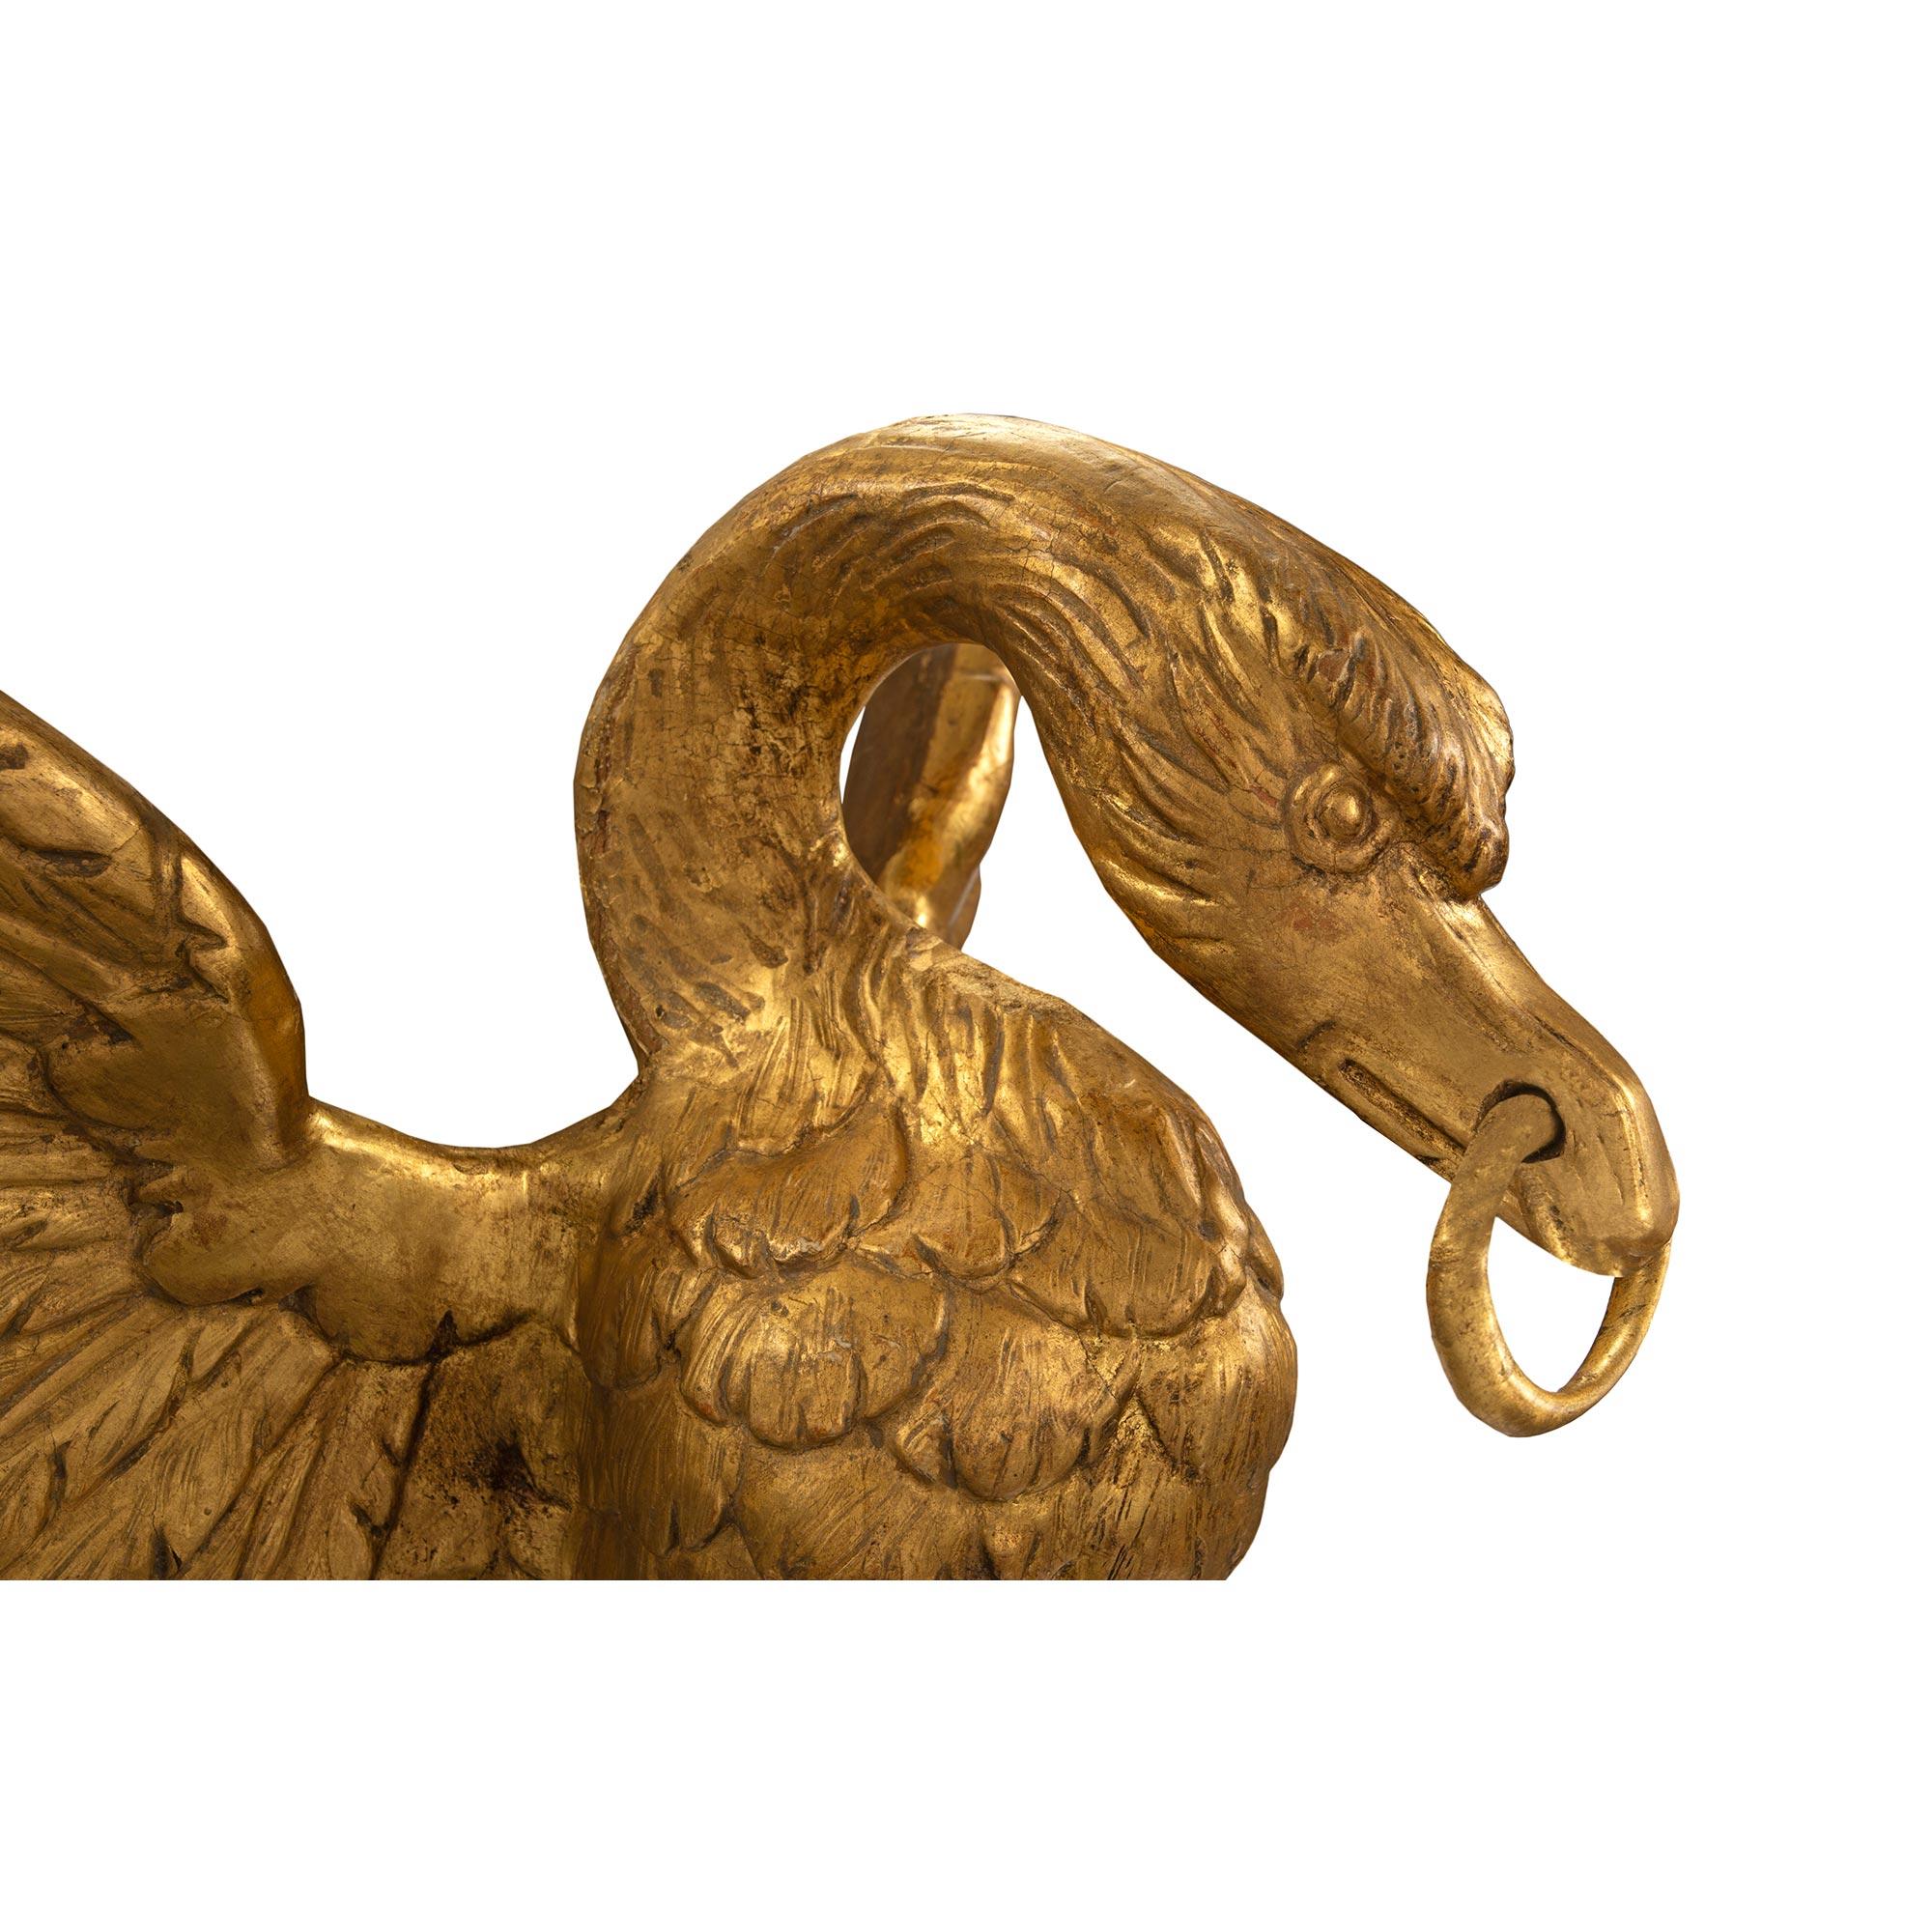 Italian Mid-18th Century Louis XVI Period Wall Mounted Open Winged Giltwood Swan For Sale 1